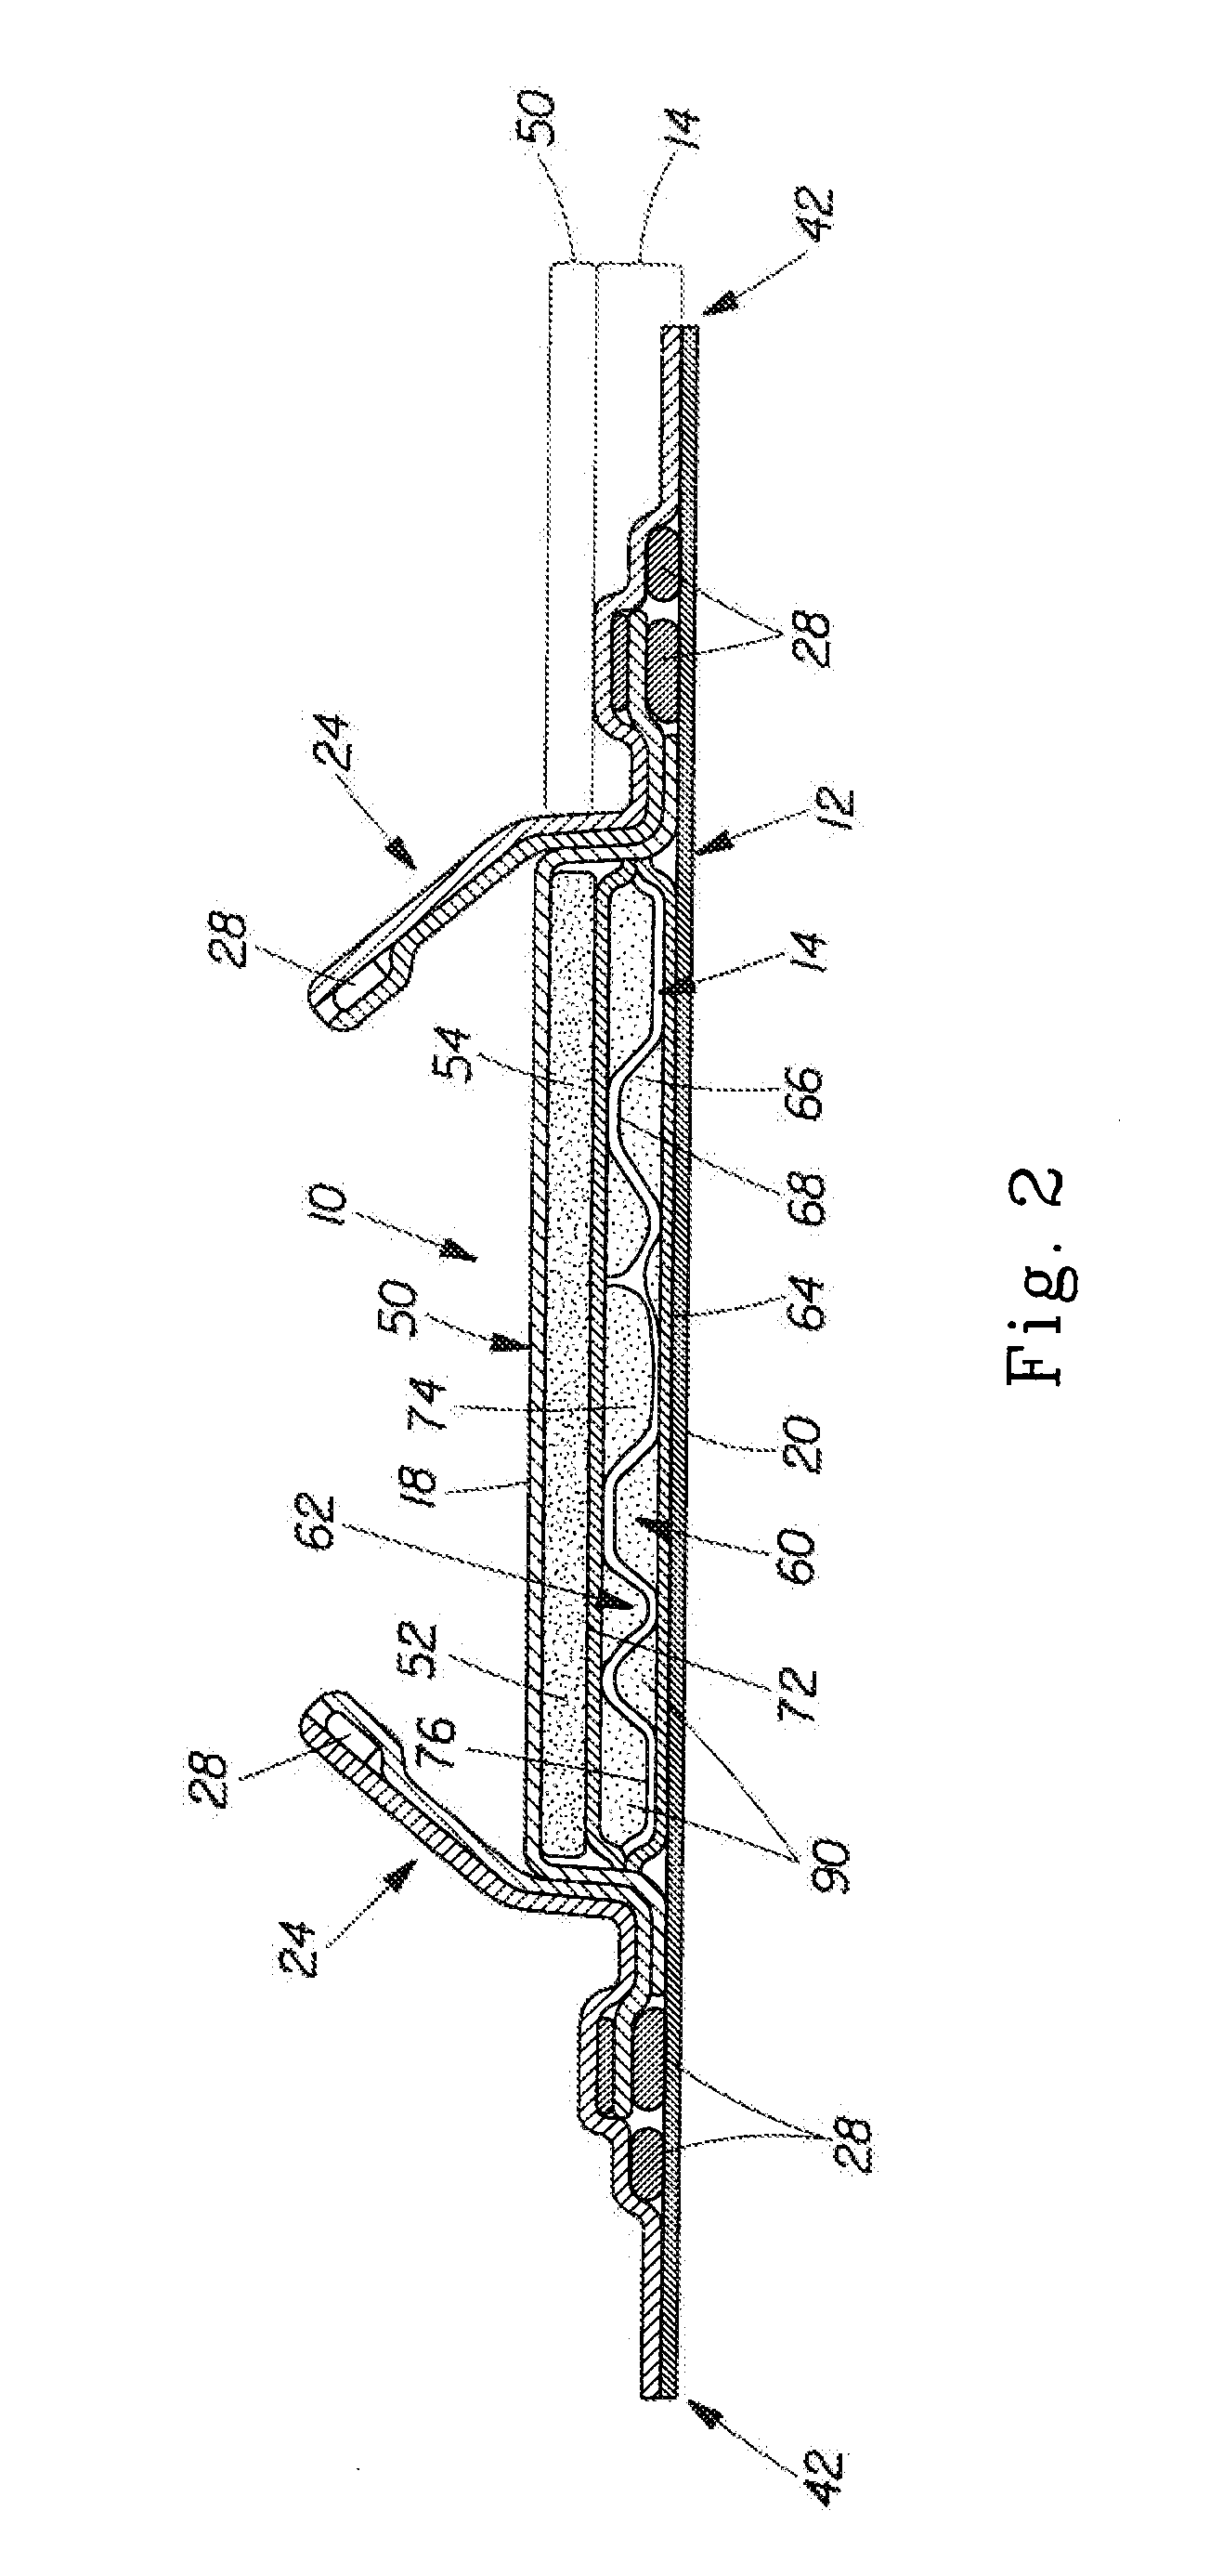 Disposable Absorbent Article With Improved Acquisition System